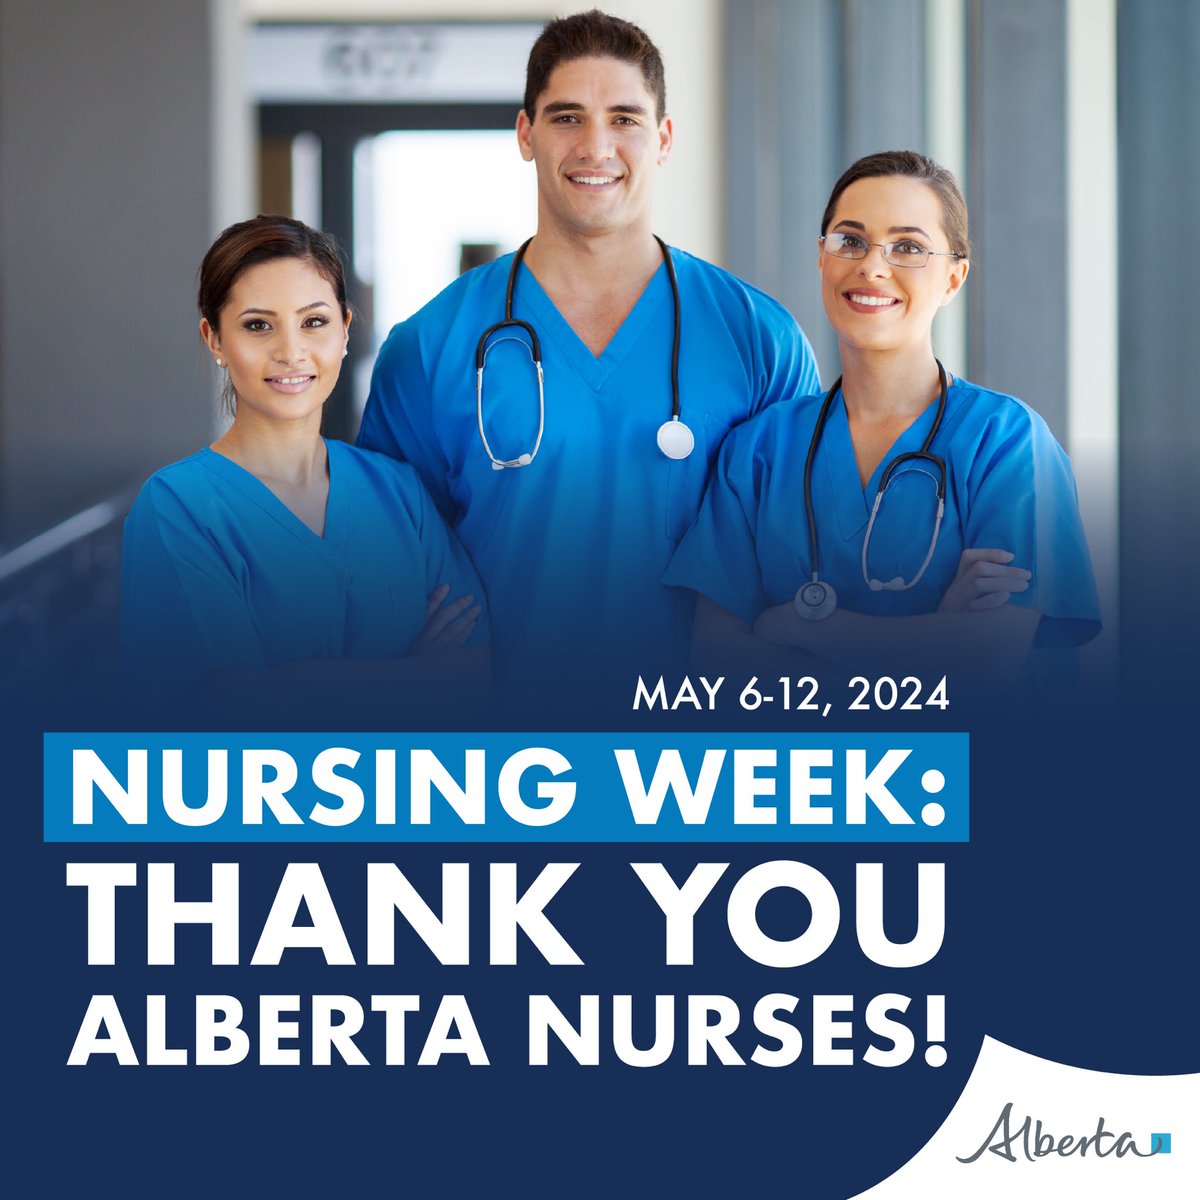 “Everyday, our nurses provide invaluable support to our communities by providing care to patients and assisting physicians with their important duties in keeping Albertans healthy. During Nurses Week, we recognize the continued efforts of our nurses in making Alberta a better…